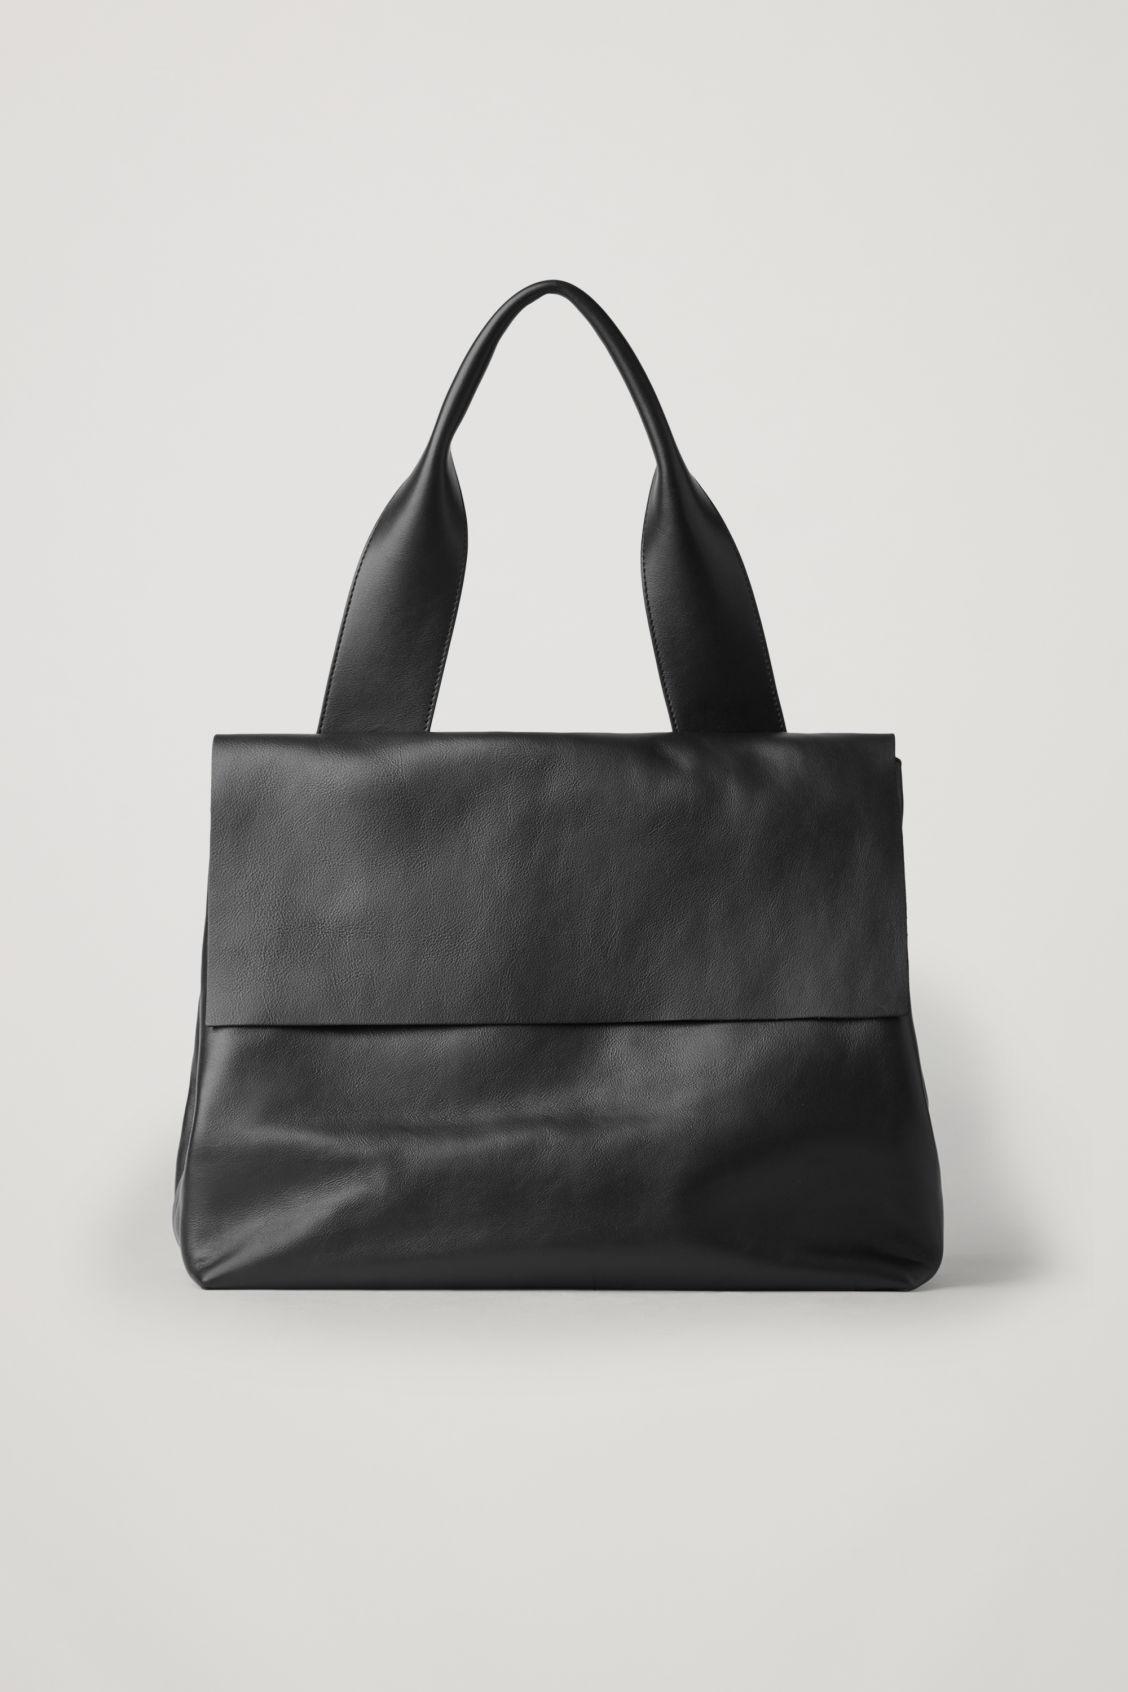 Tote Bag With Leather Straps :: Keweenaw Bay Indian Community